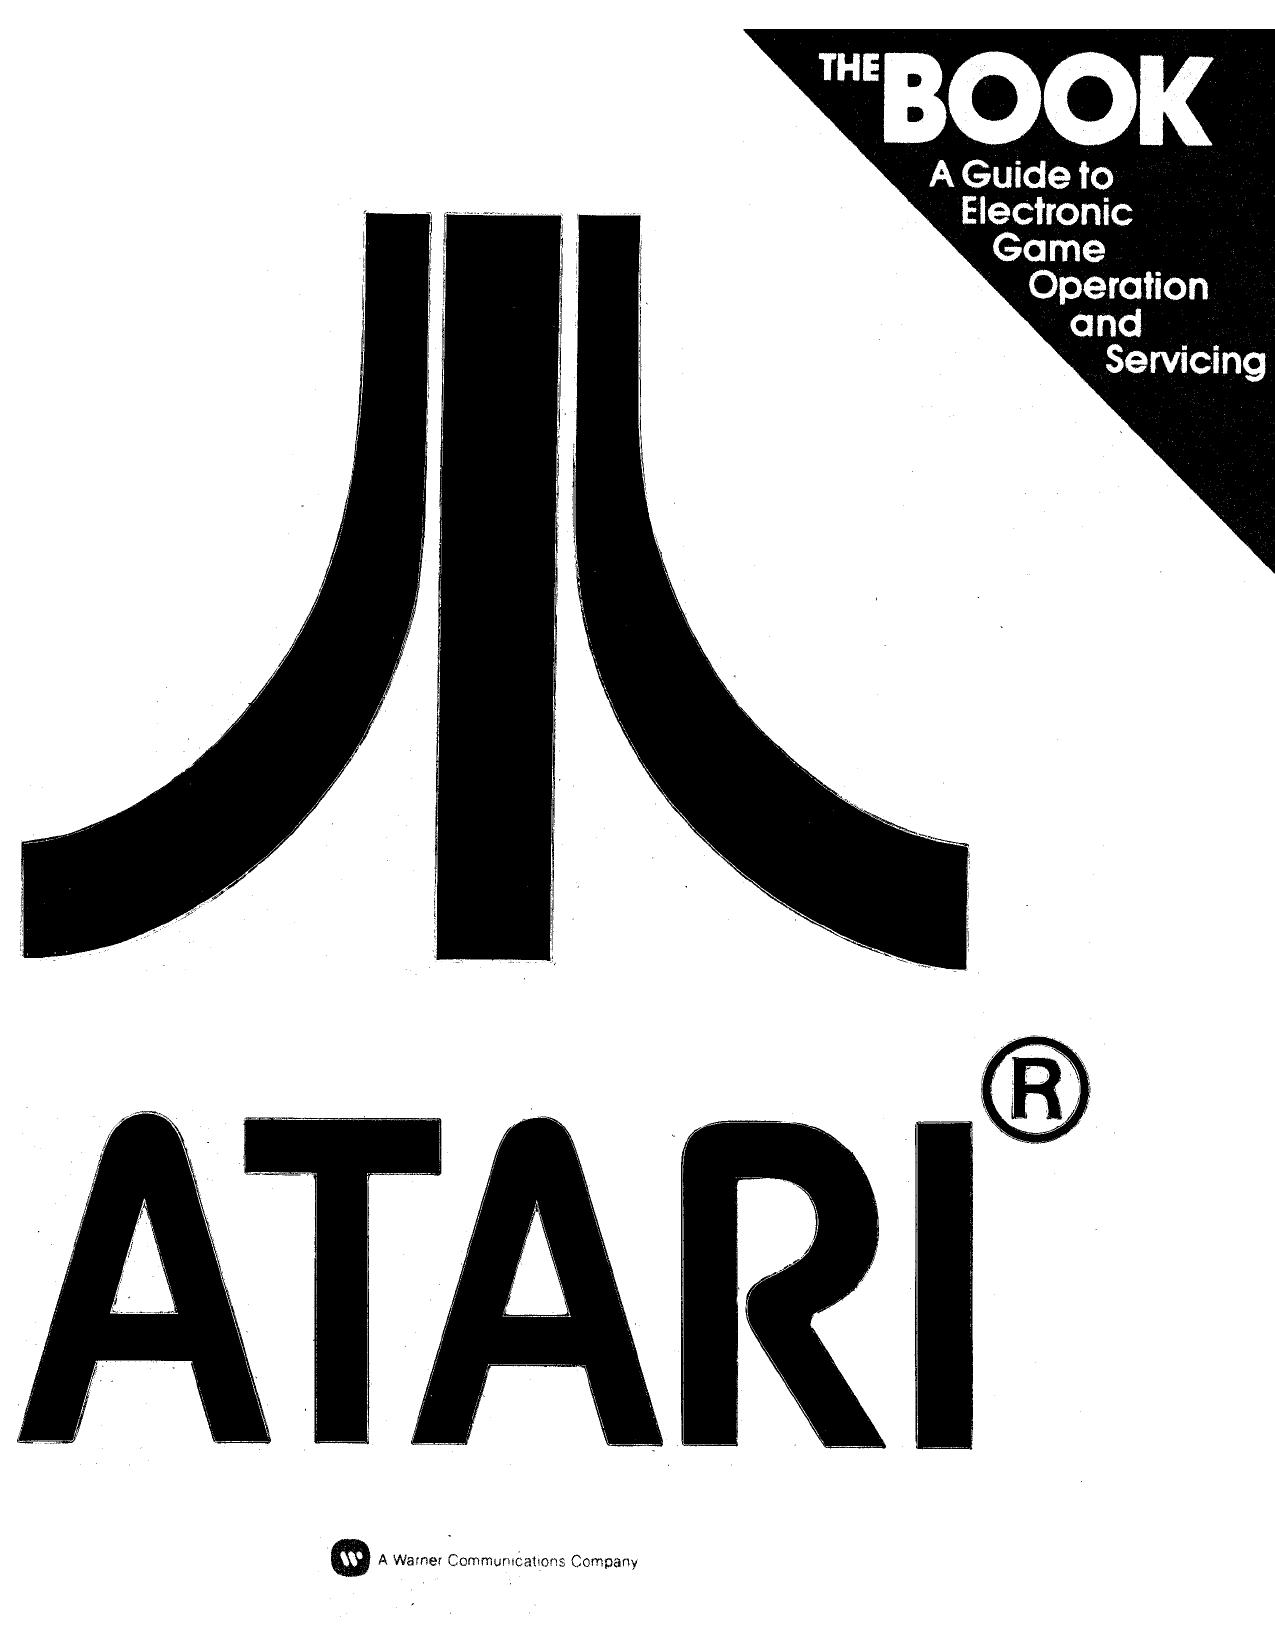 Atari The Book (Guide to Electronic Game Operation & Servicing) (U)